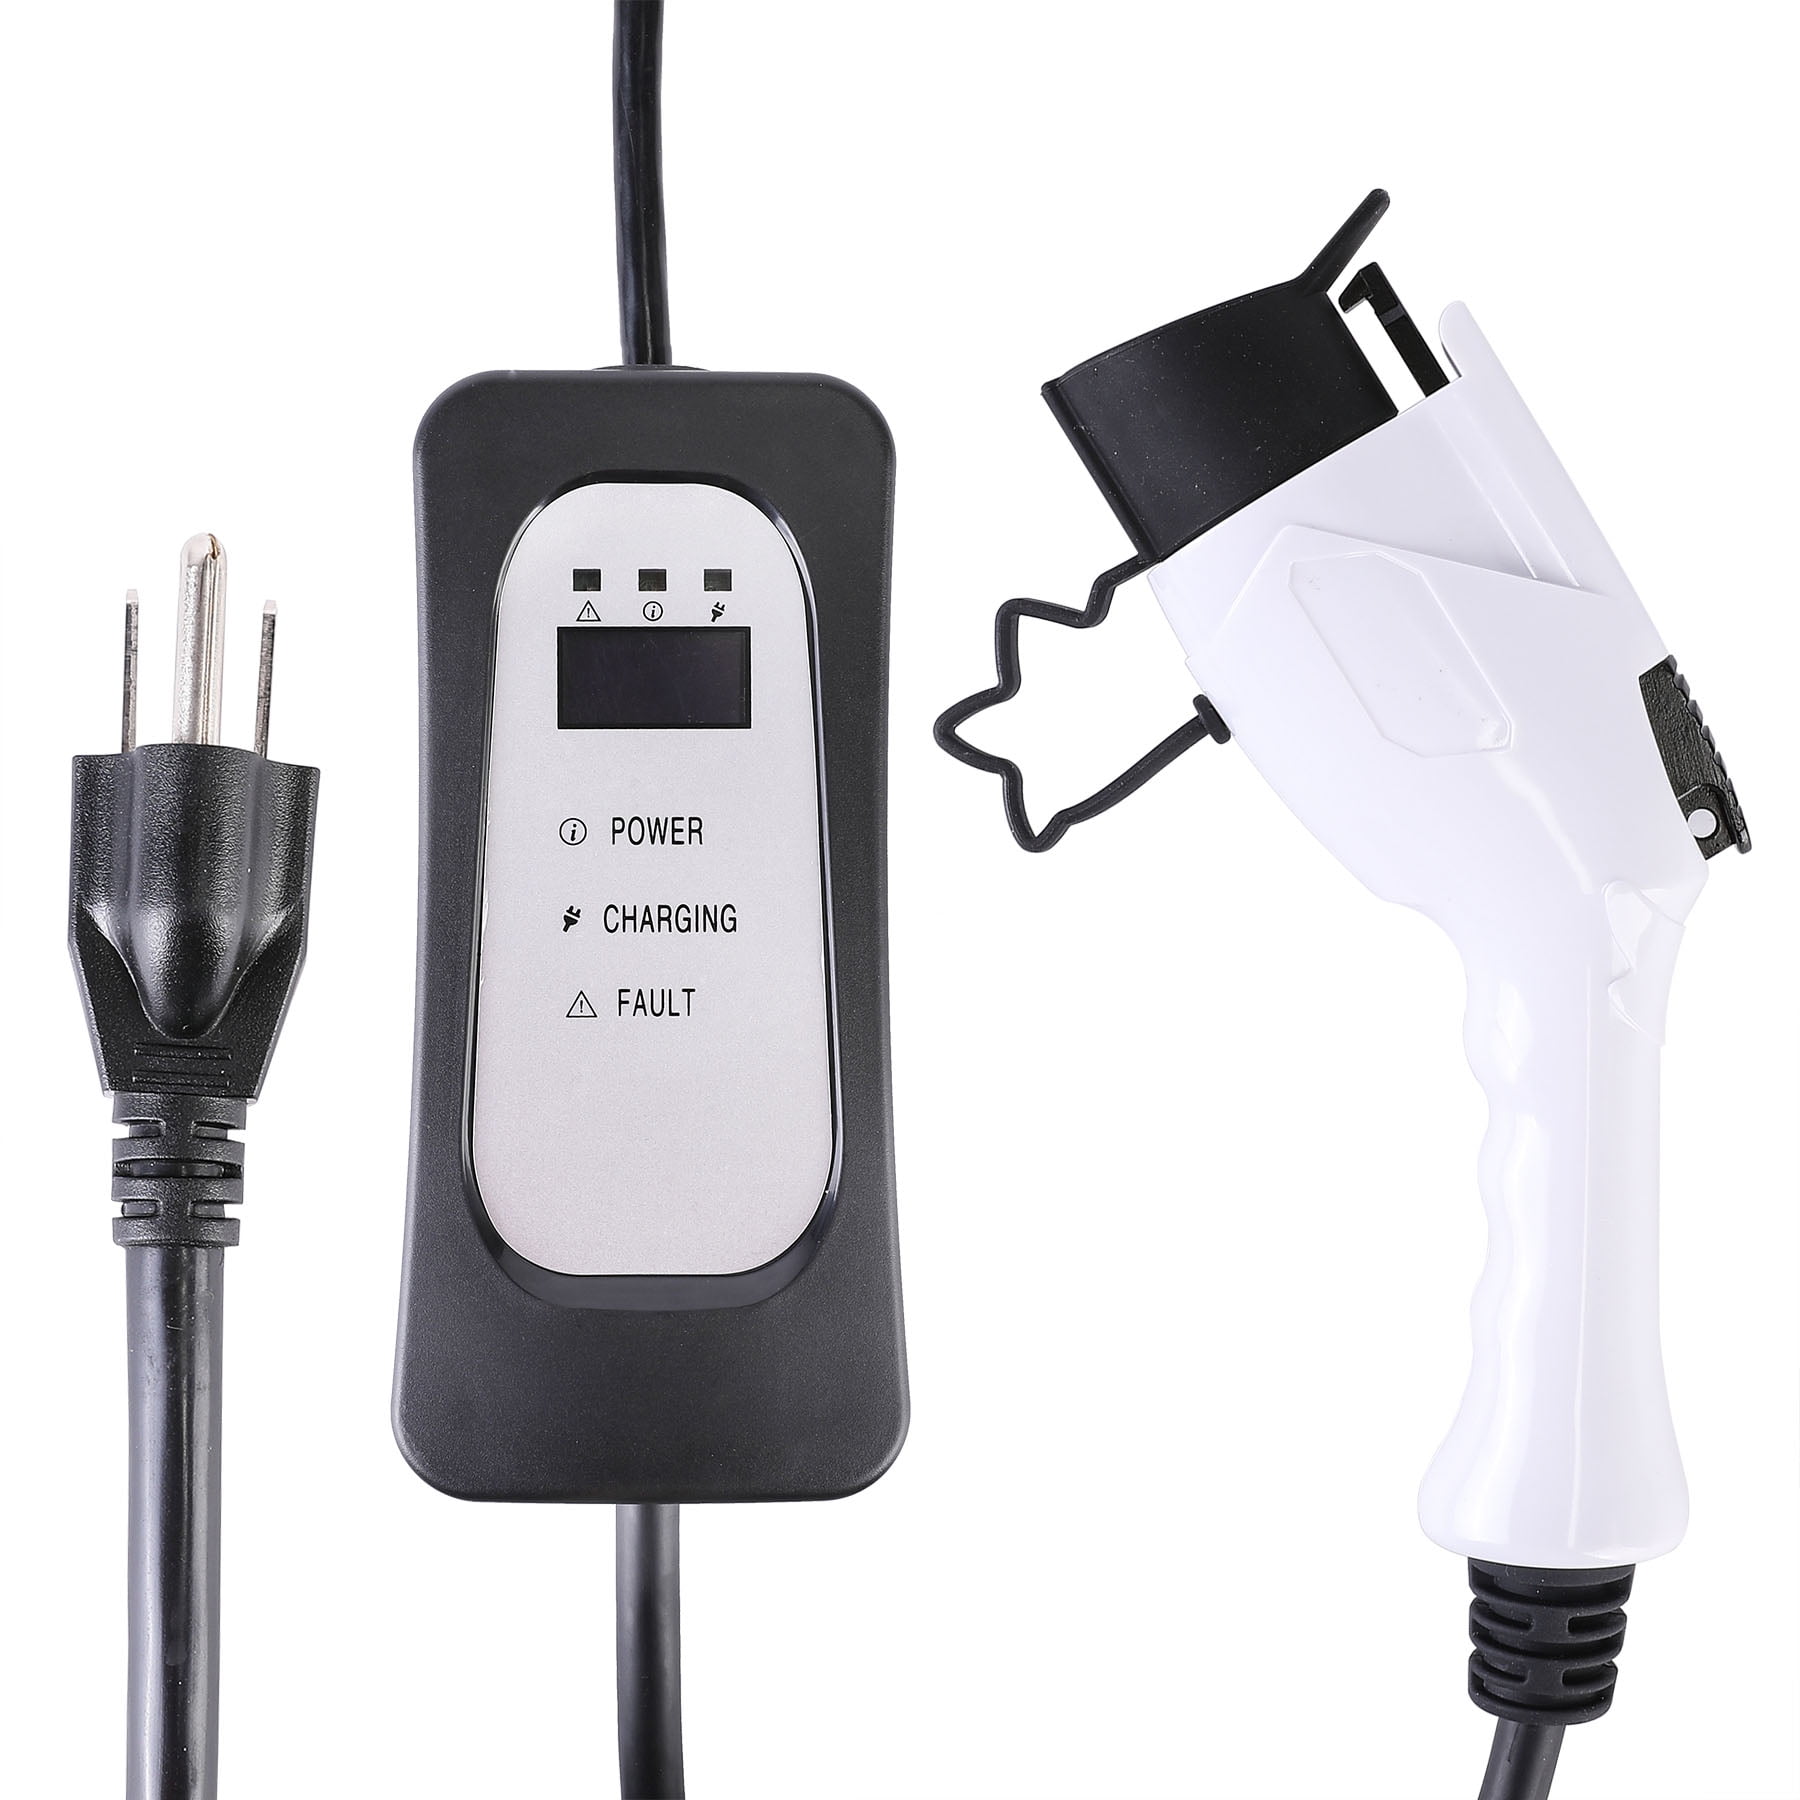 Level Electric Car EV Charger (110V-240V 16A), IP54 Waterproof Rating,  16' Cord and Heavy Duty Electric Cable Plug Adapter, SAE J1772-EVSE UL  Recognized